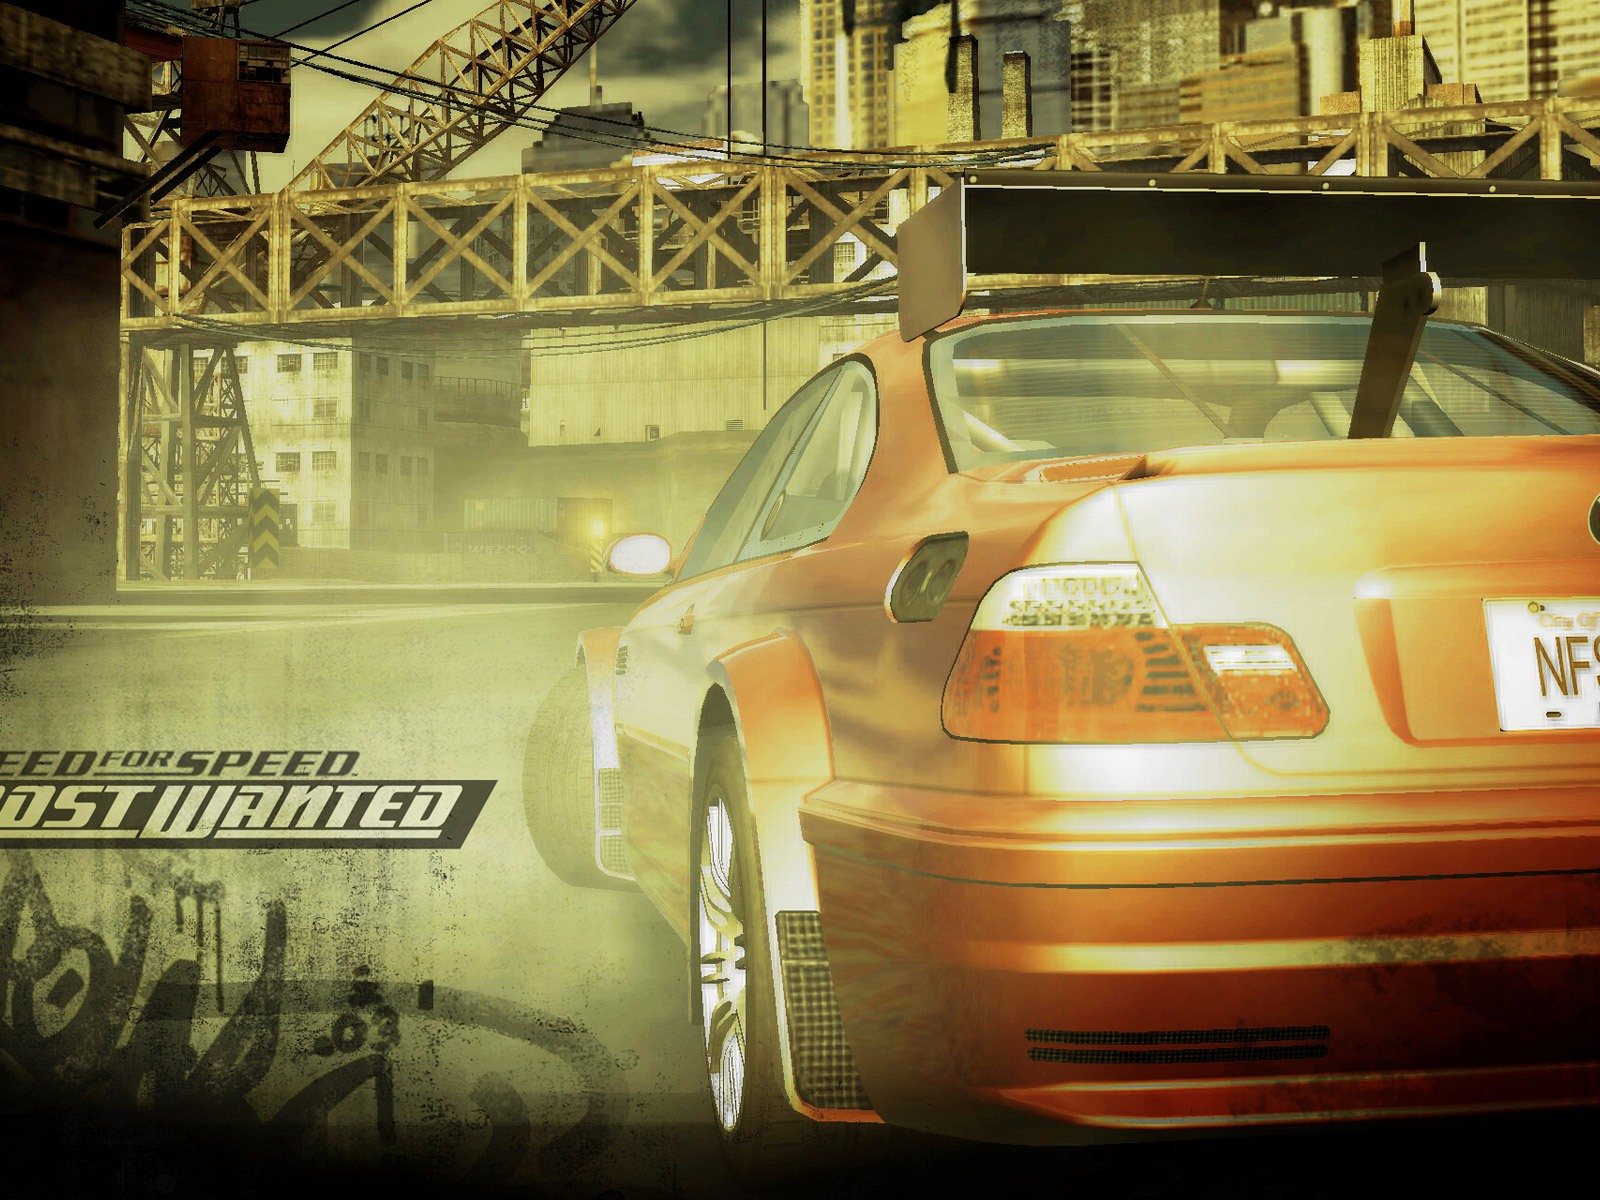 Need for Speed: Most Wanted 极品飞车17：最高通缉 高清壁纸4 - 1600x1200